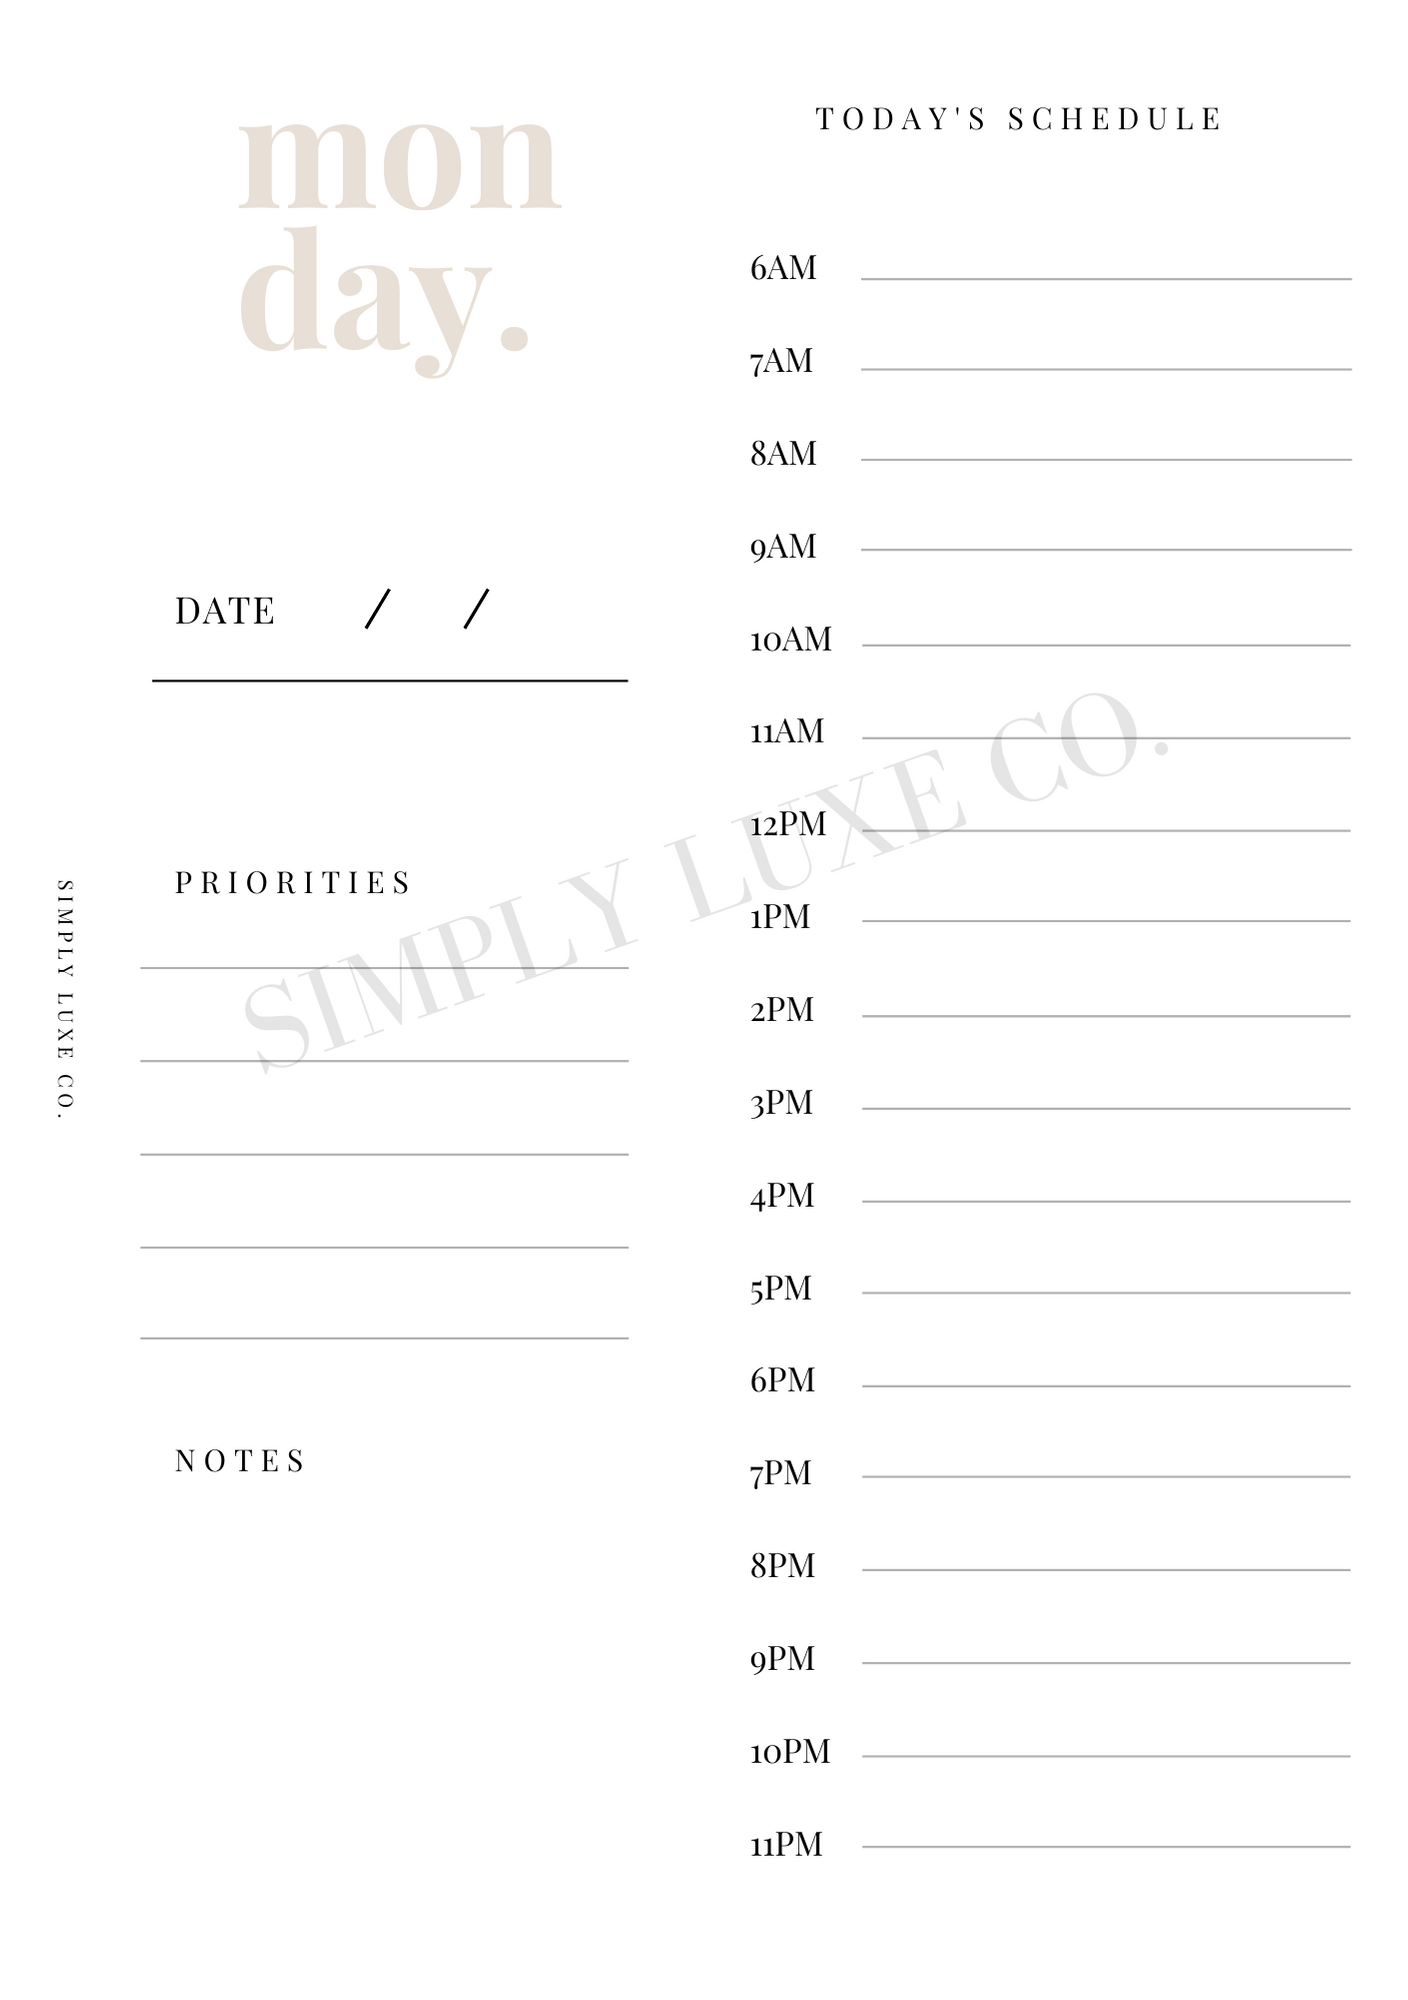 Undated Days Printable Insert Bundle - Monday thru Sunday w/ Weekly Overview - Available in 2 colors